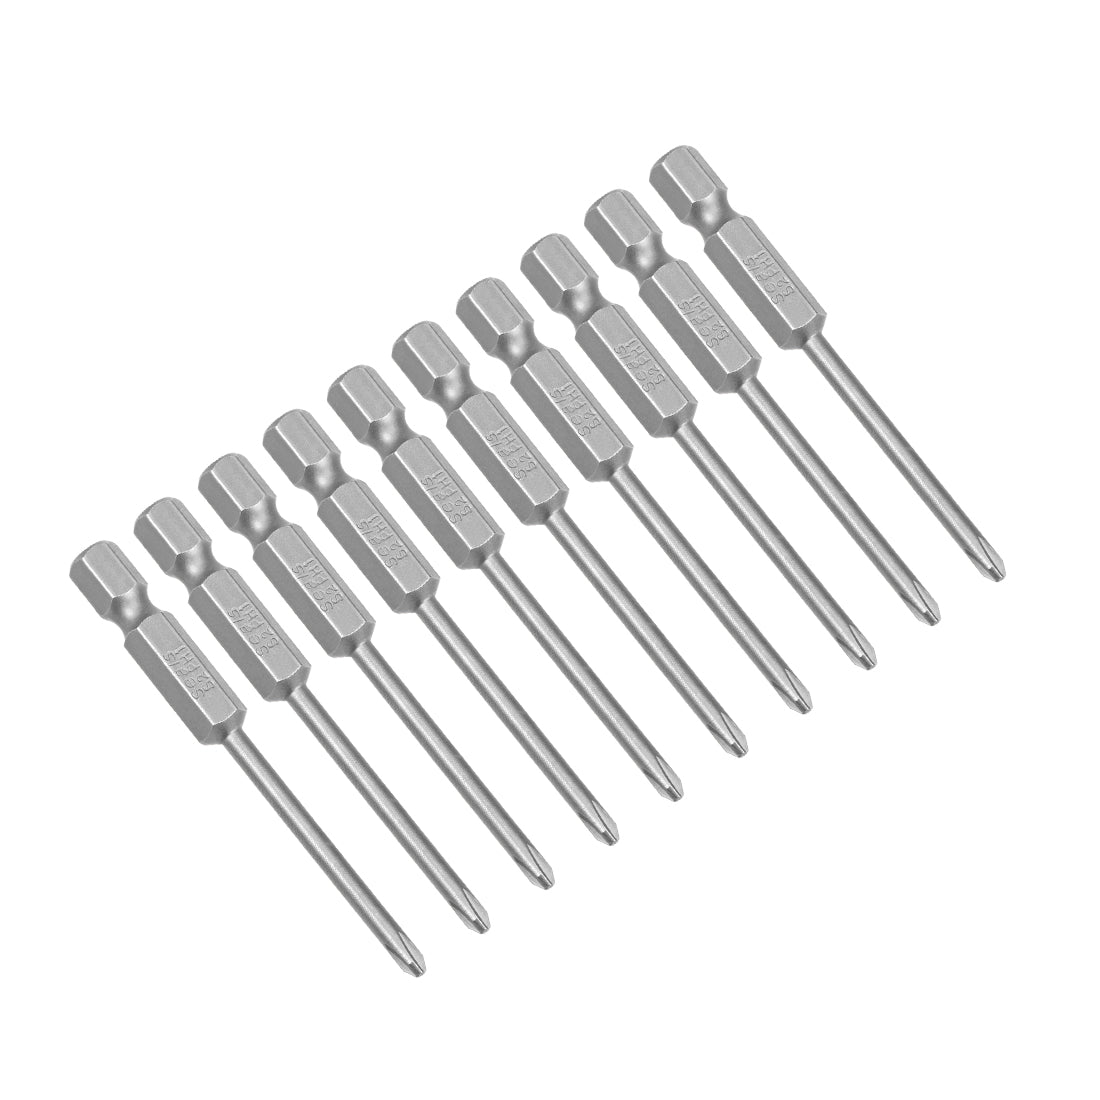 uxcell Uxcell 10 Pcs Magnetic Phillips Screwdriver Bits, Hex Shank S2 Power Tools